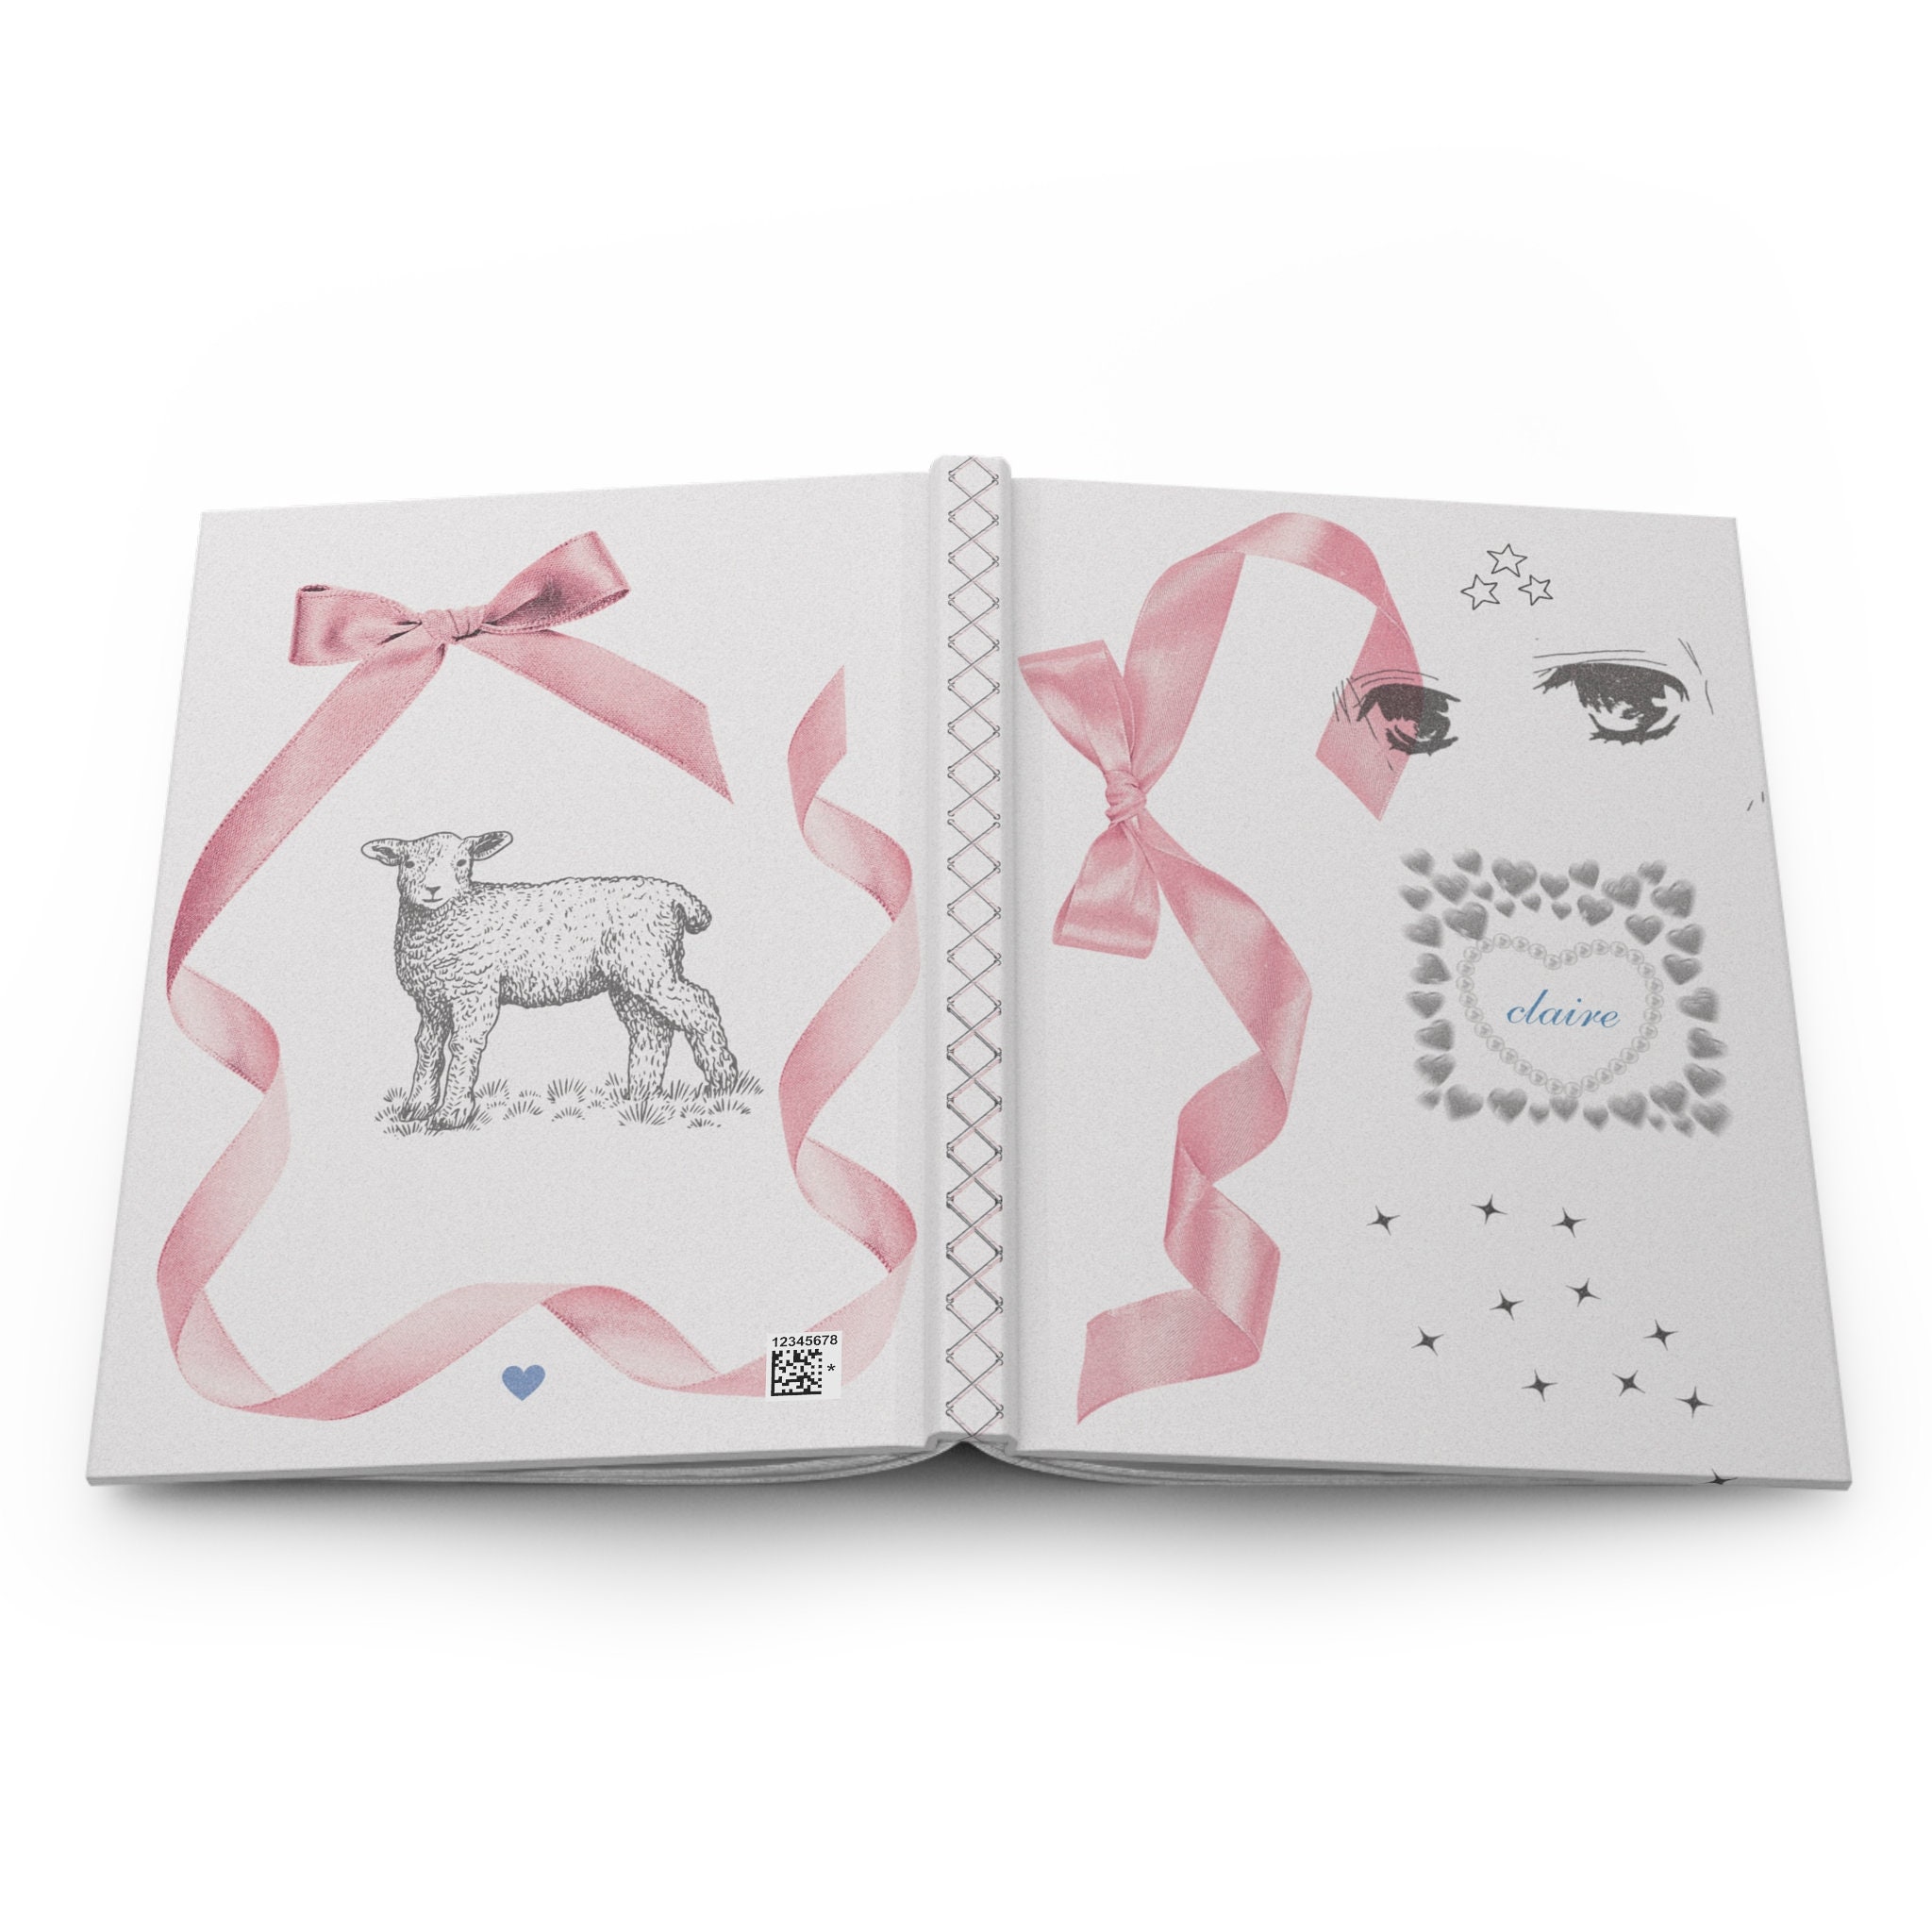 Coquette Ruffle Binder Journal with pages